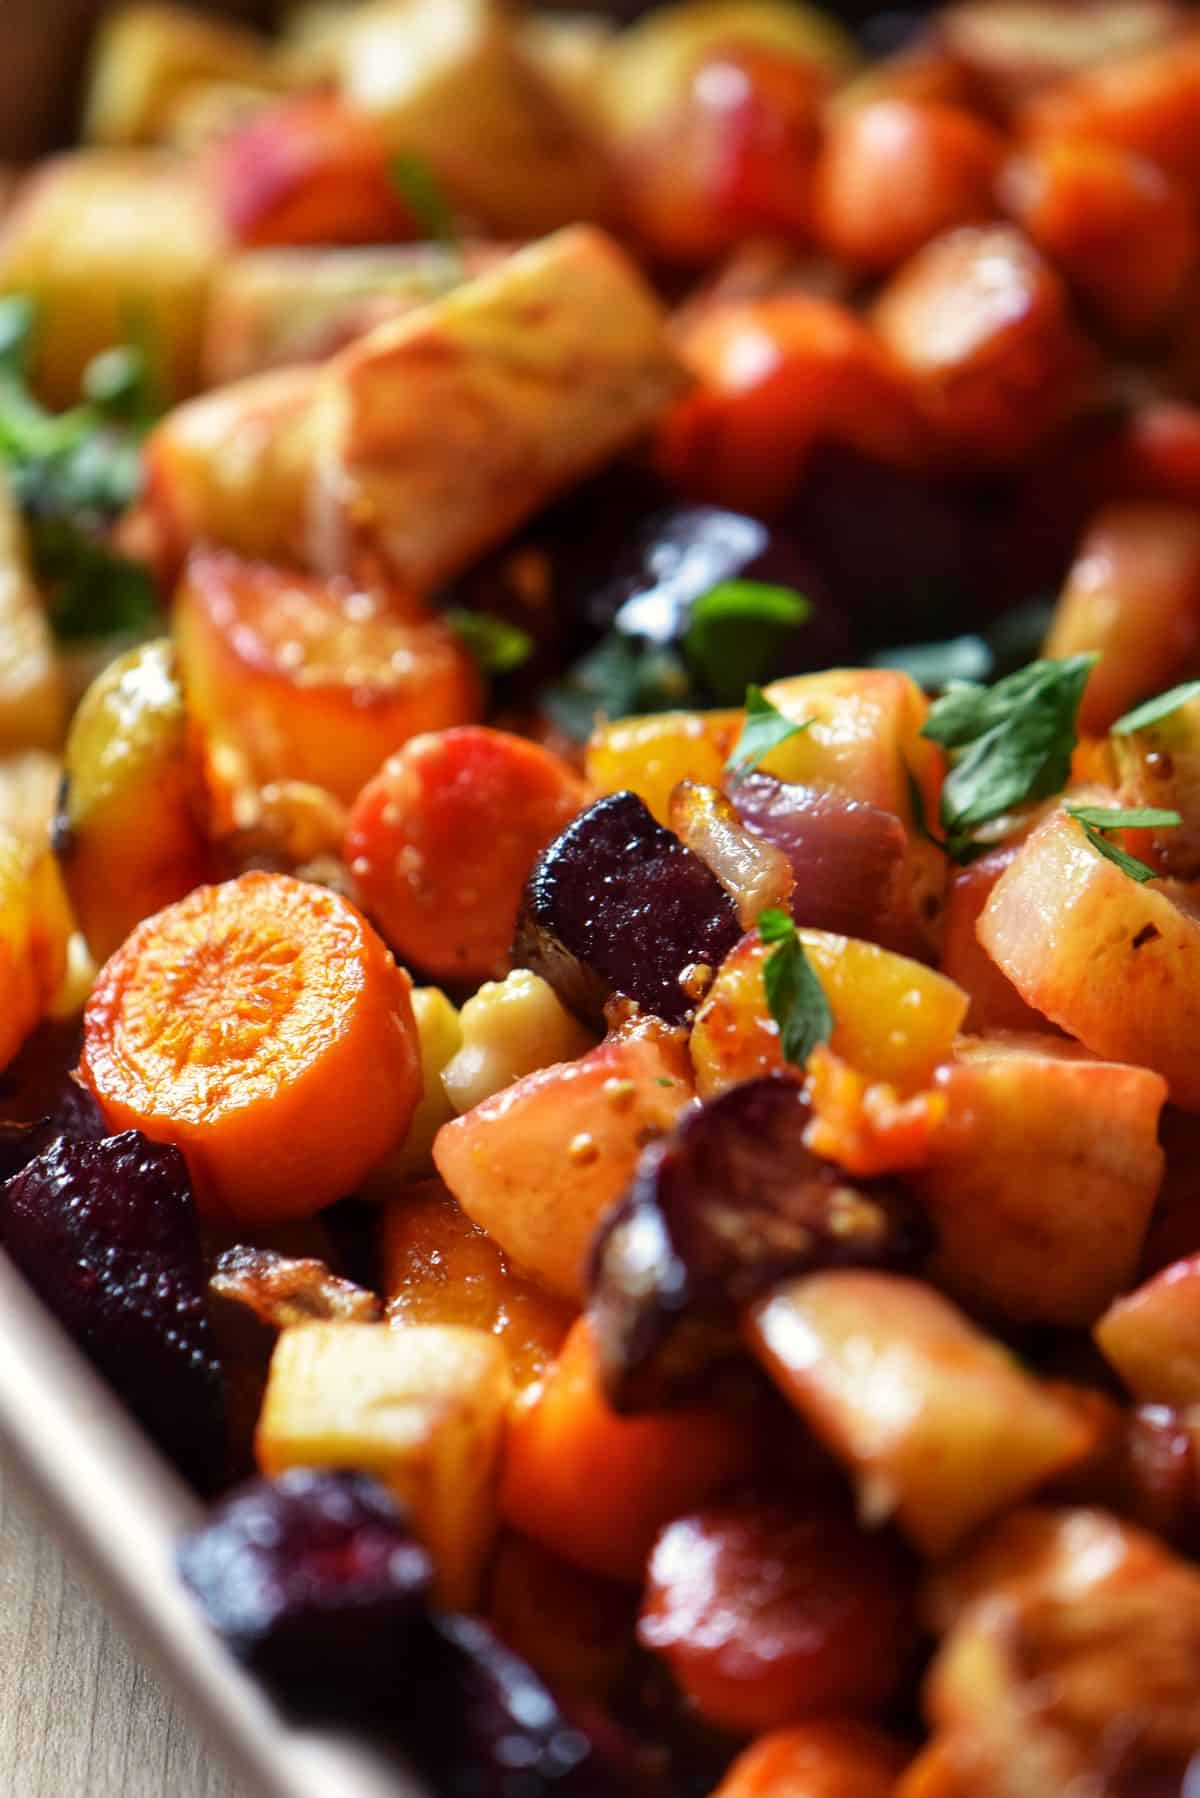 Roasted Root Vegetables: A Vegetable Medley Recipe - She Loves Biscotti